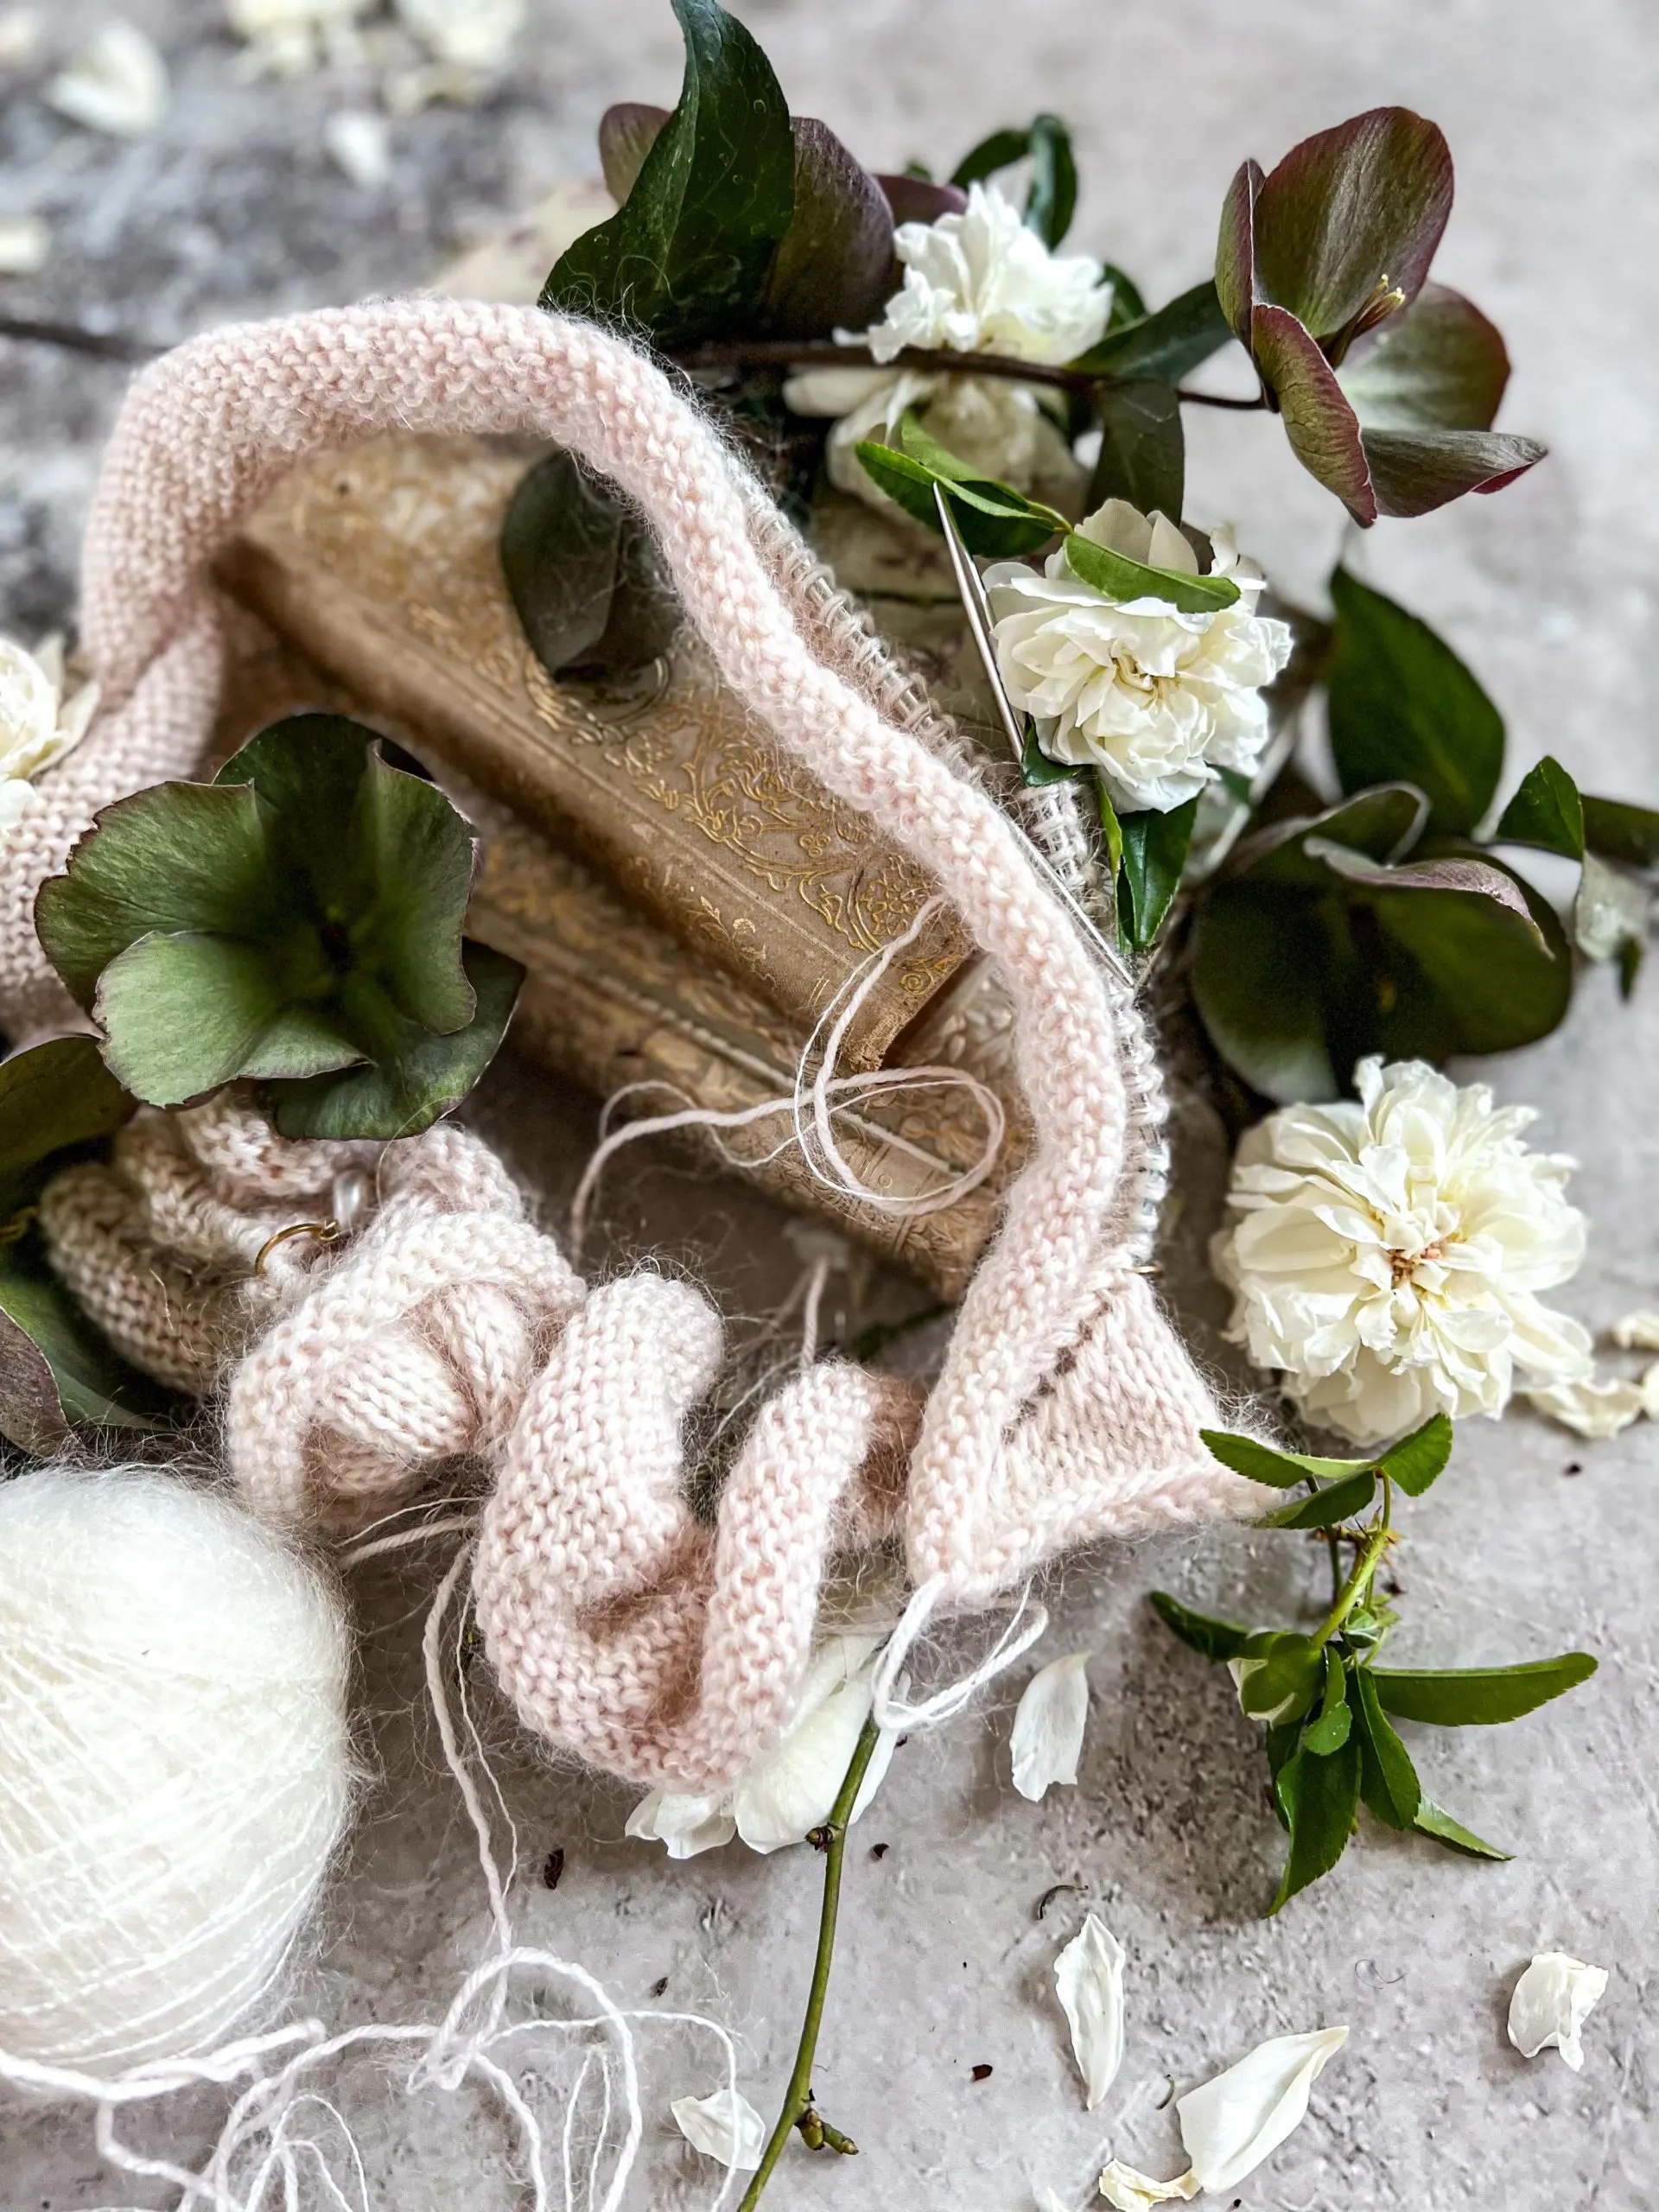 Pink knitting on a circular needle surrounded by hellebores, white rosettes, and antique books